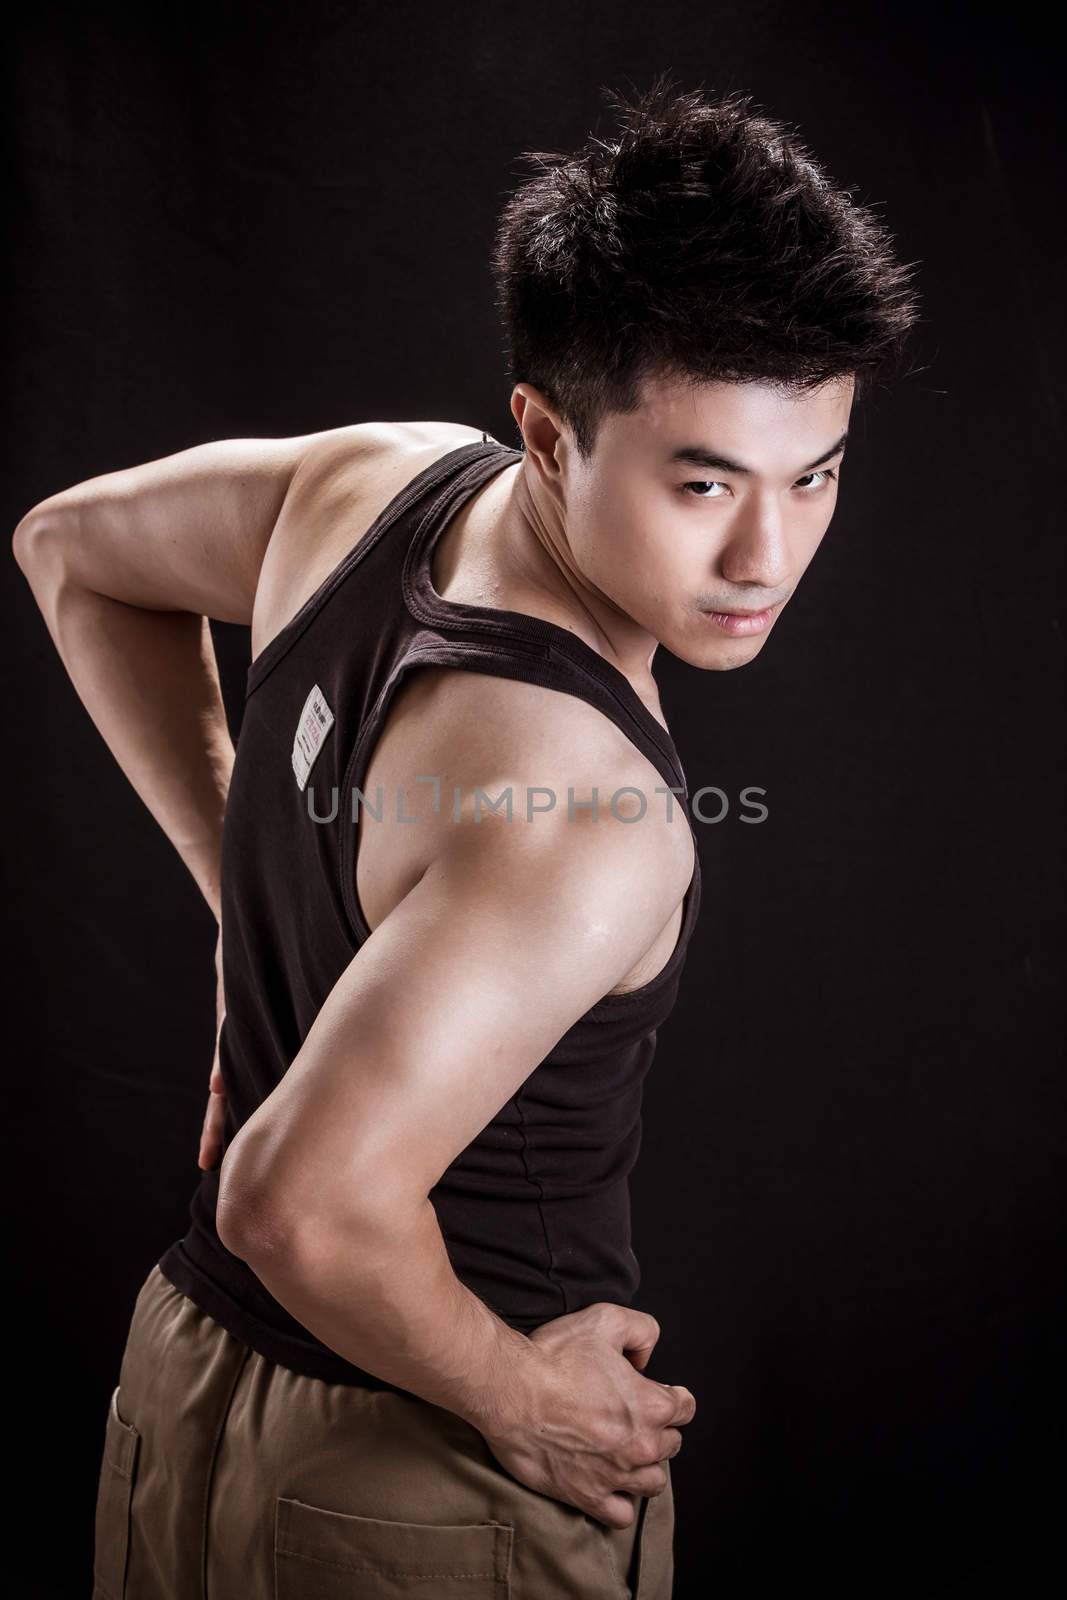 Fitness level young man by imagincy